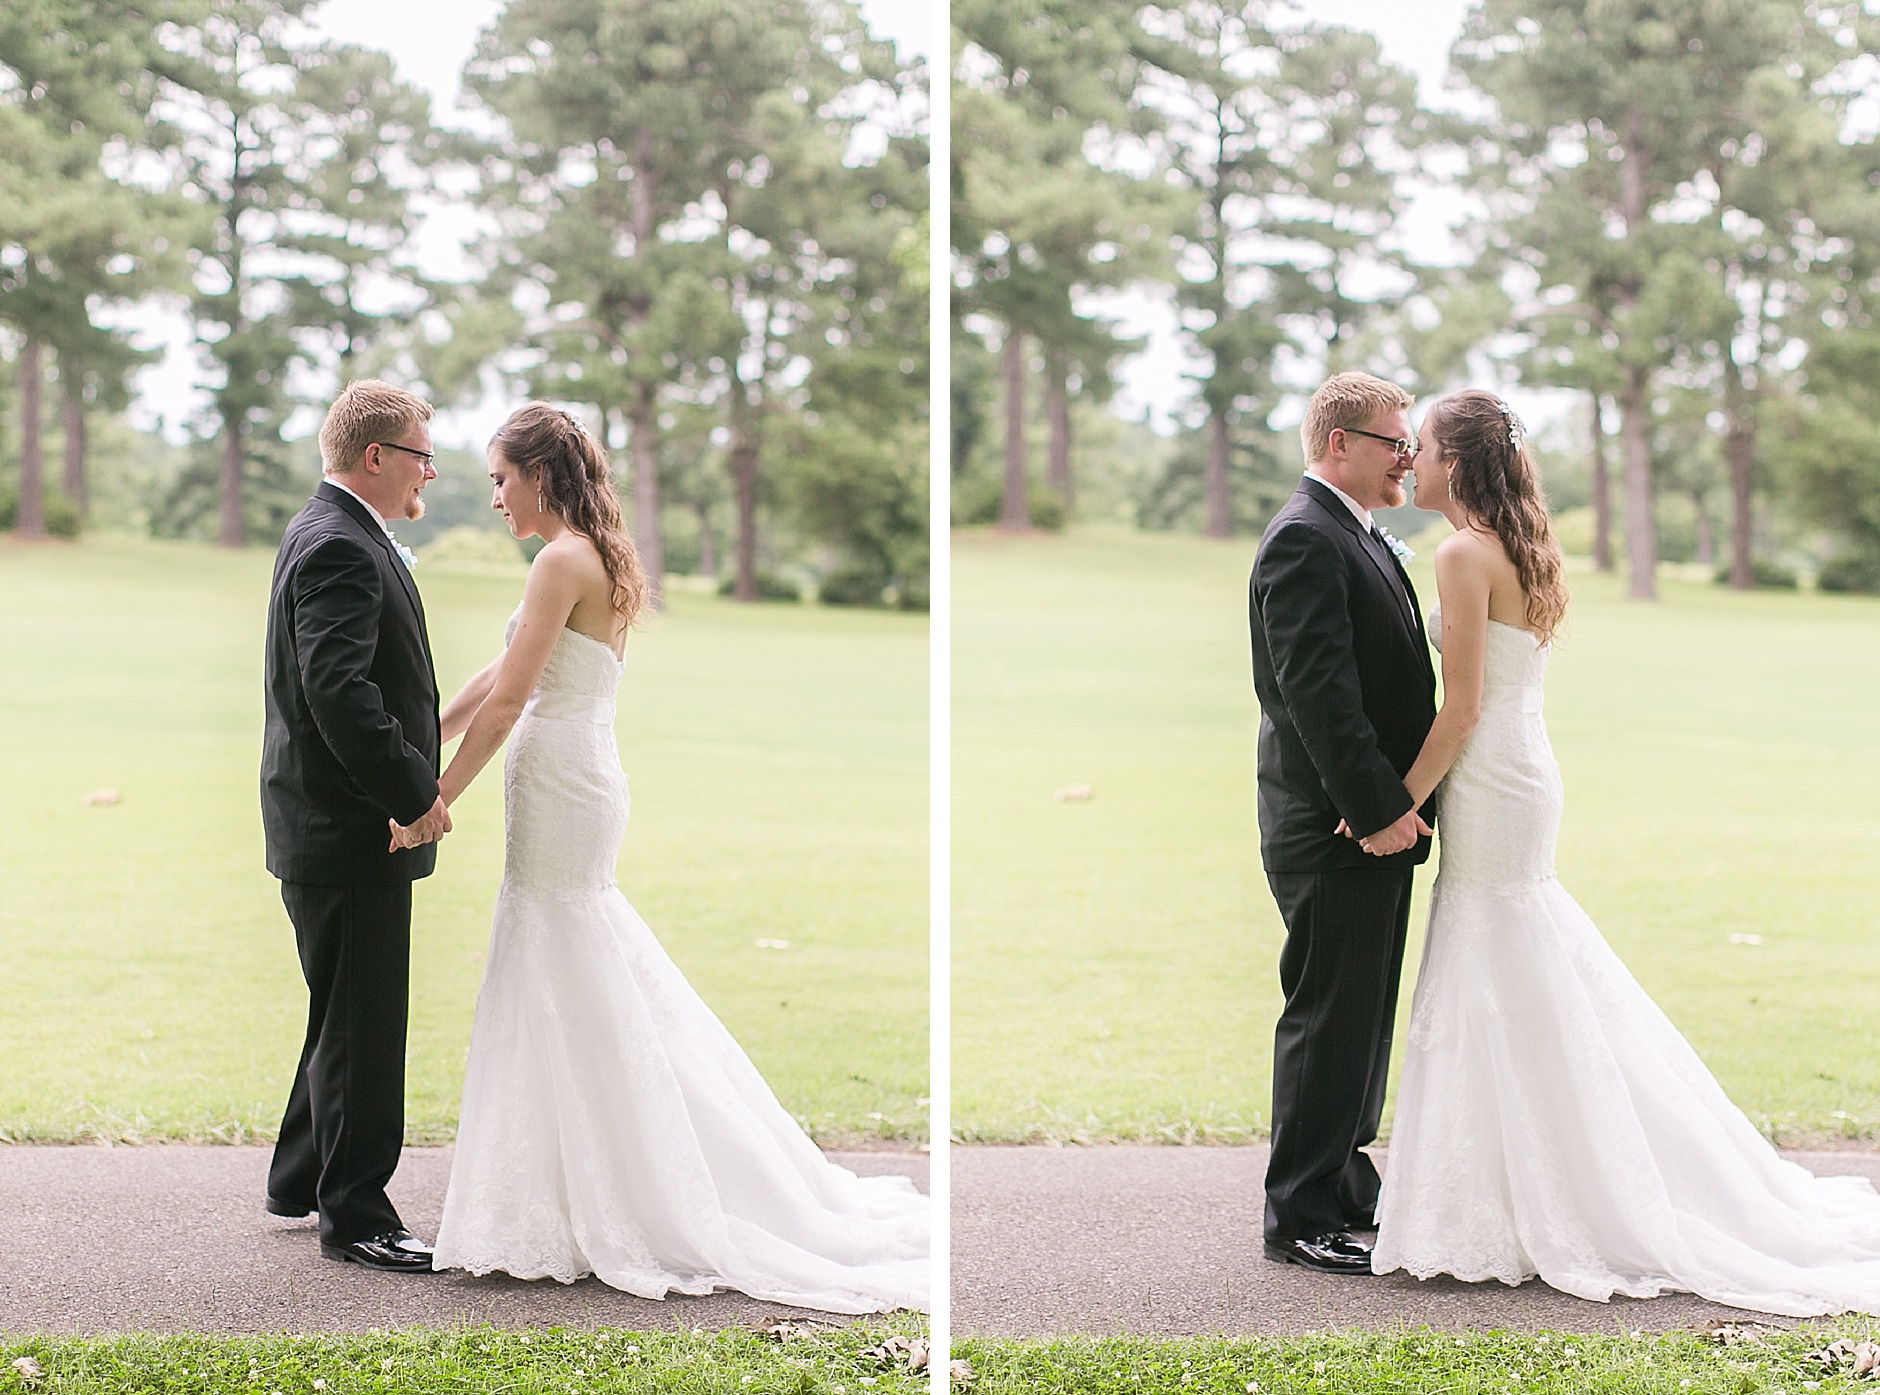 A Purple and Teal Summer Wedding at Kentucky Lake by Rachael Houser Photography